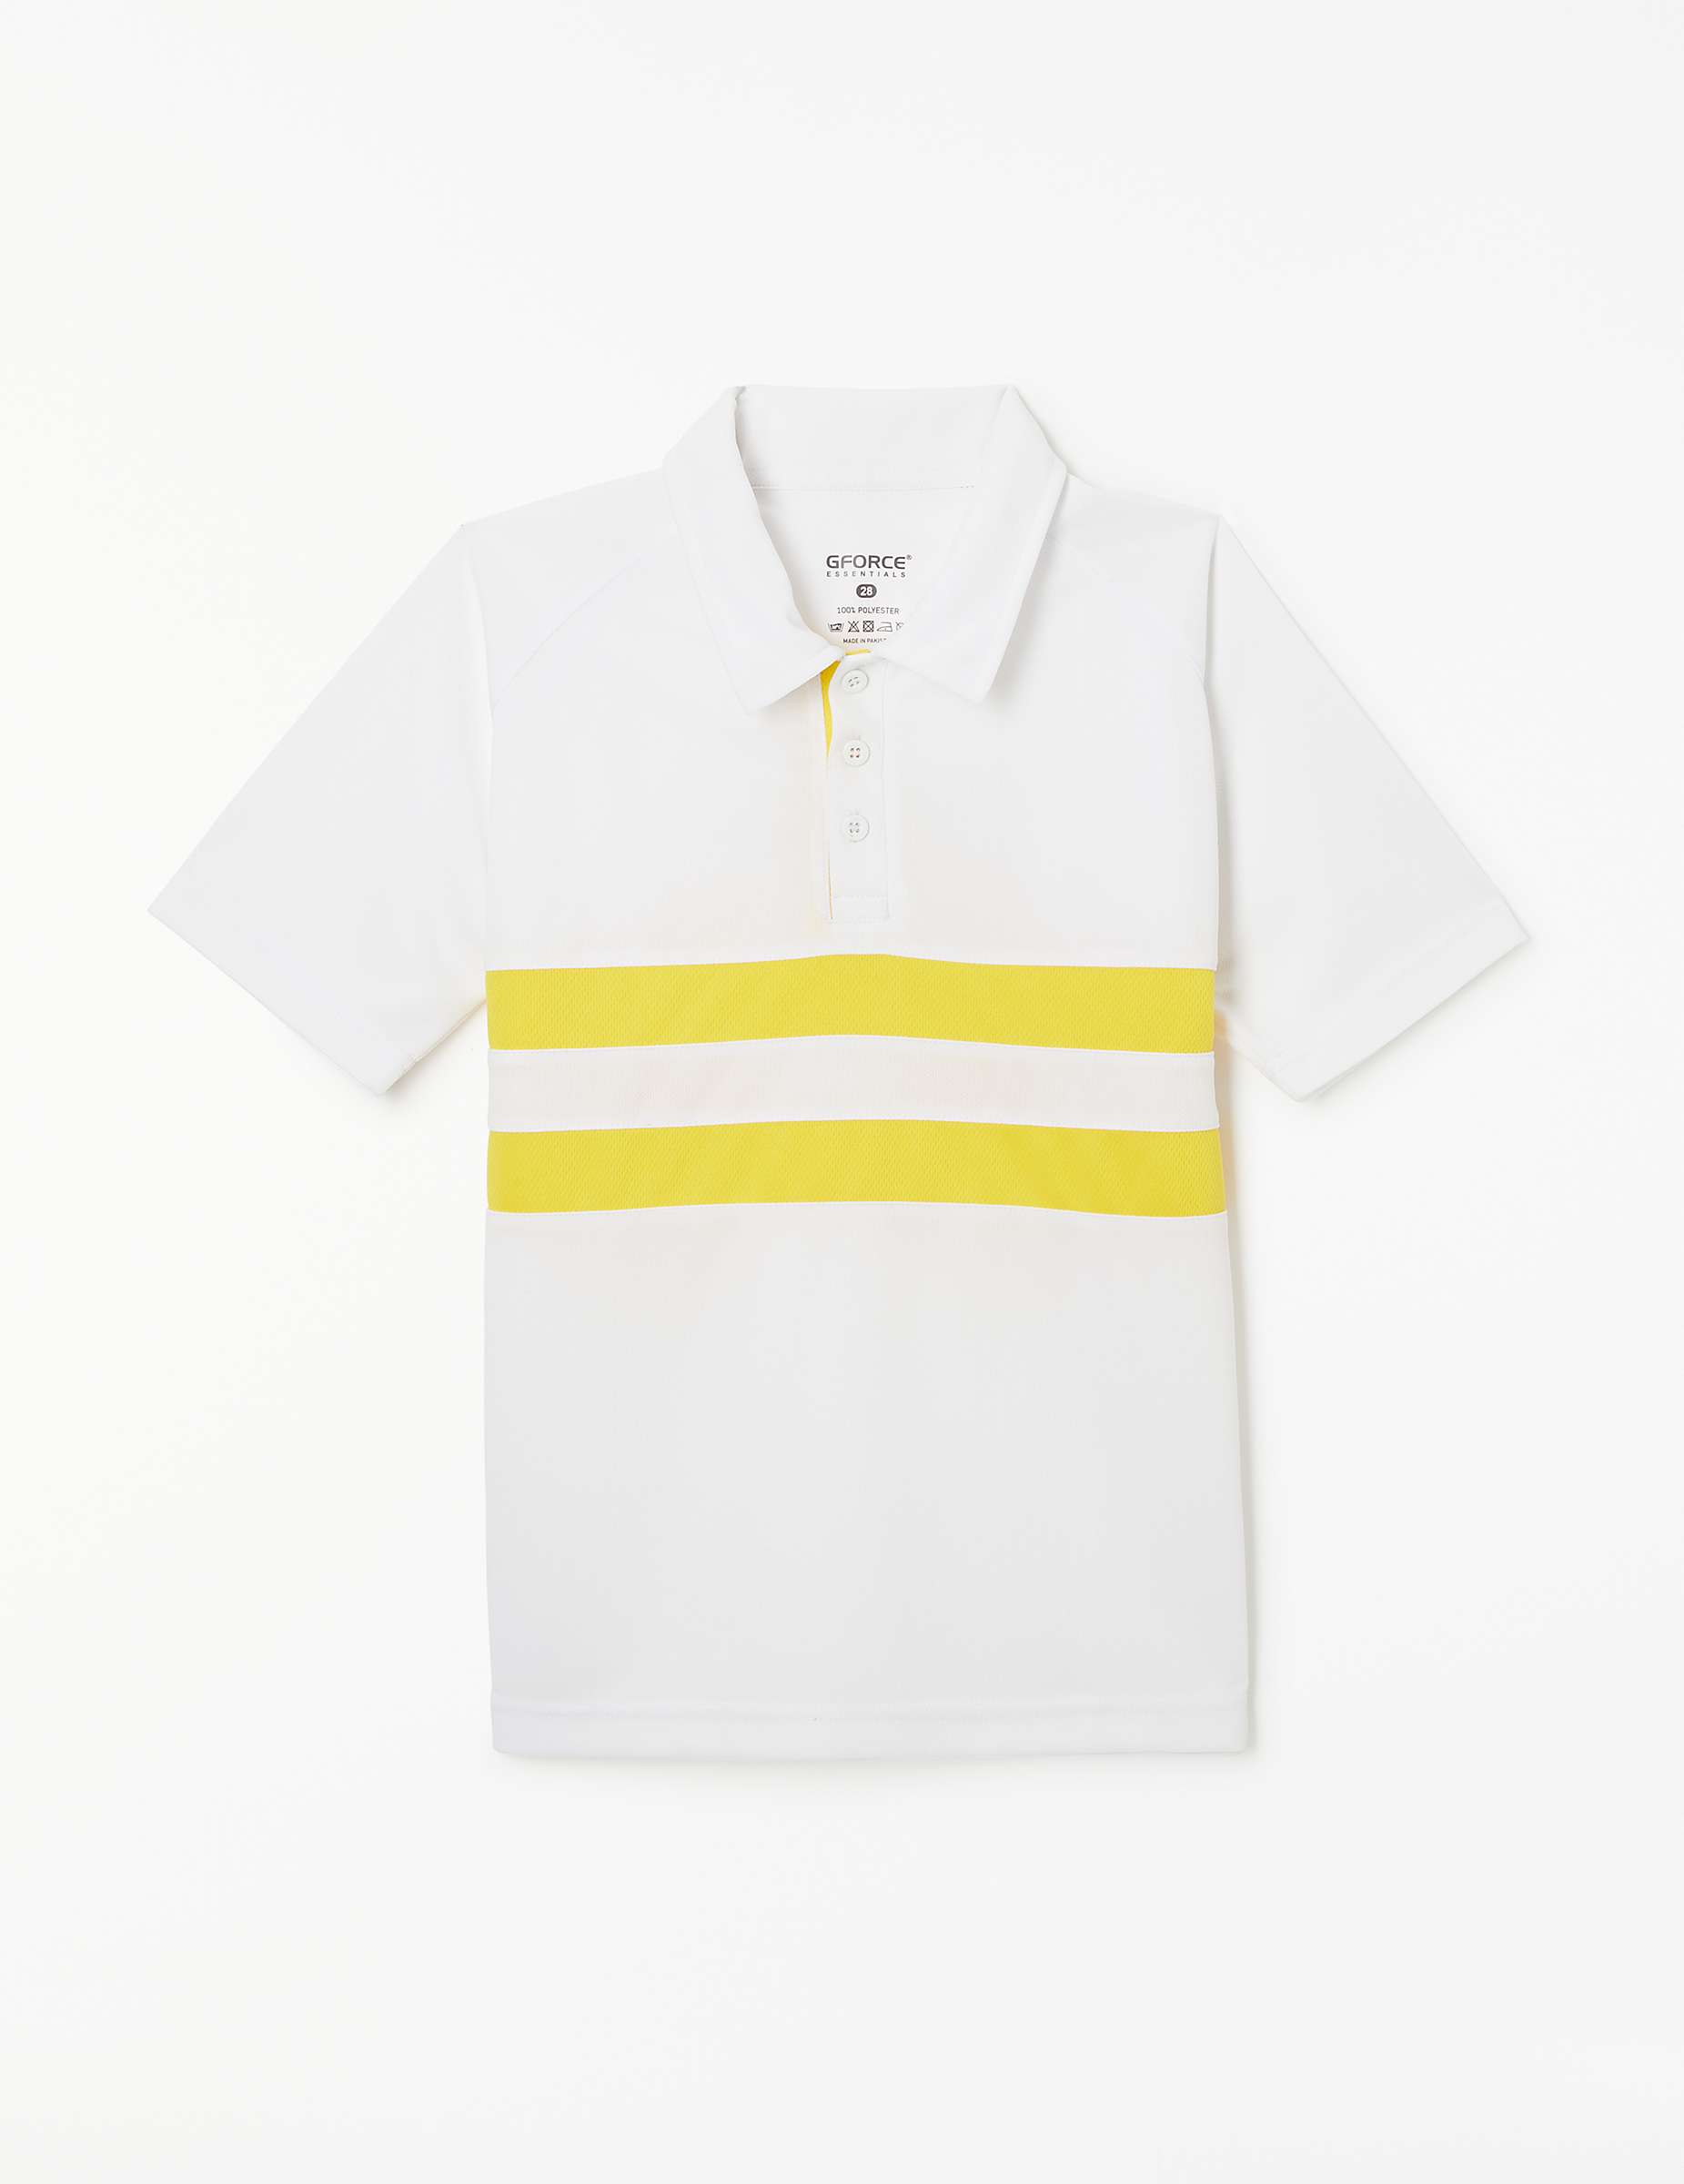 Buy Chigwell School Tudors House Polo Shirt, White/Gold Online at johnlewis.com